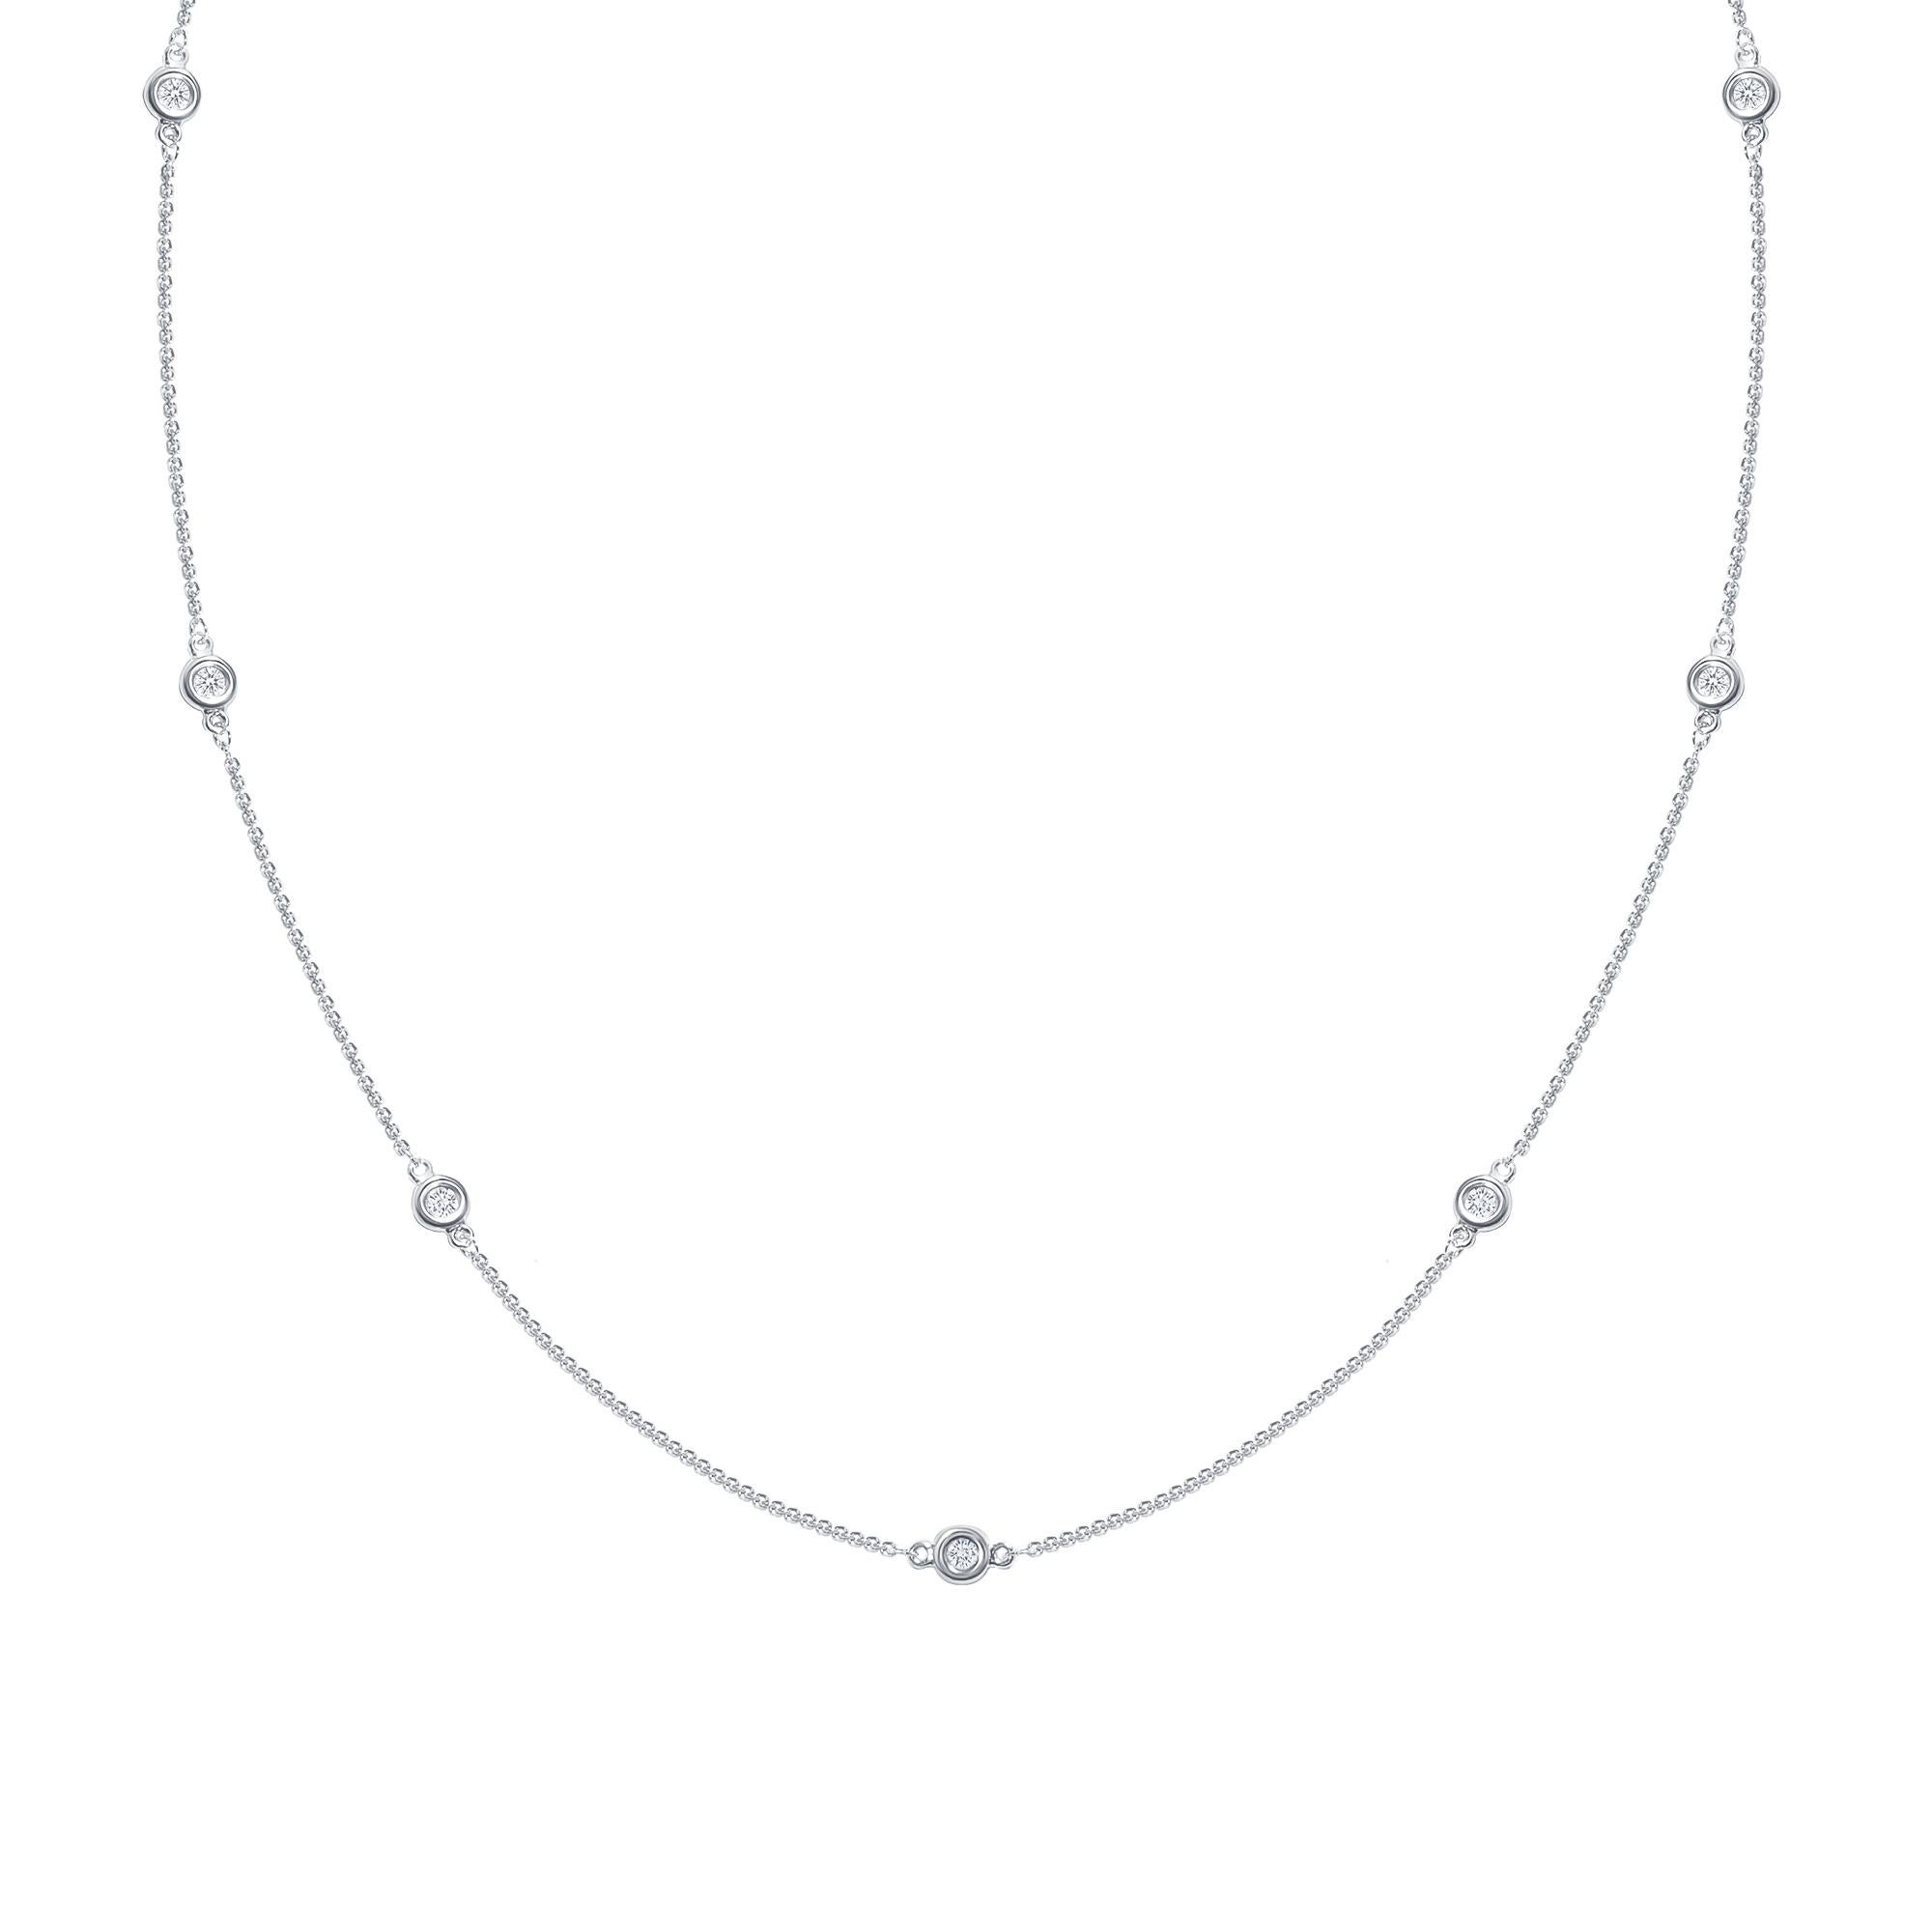 Eight elegant round diamonds set in a bezel setting along a 14k gold chain necklace.

Gold: 14K Gold
Number of Diamonds: Eight
Gold Color: White Gold
Carat: 1.5 Carat
Necklace Length: 18 Inches
Diamond Clarity: VS
Diamond Color: F
Chain Type: